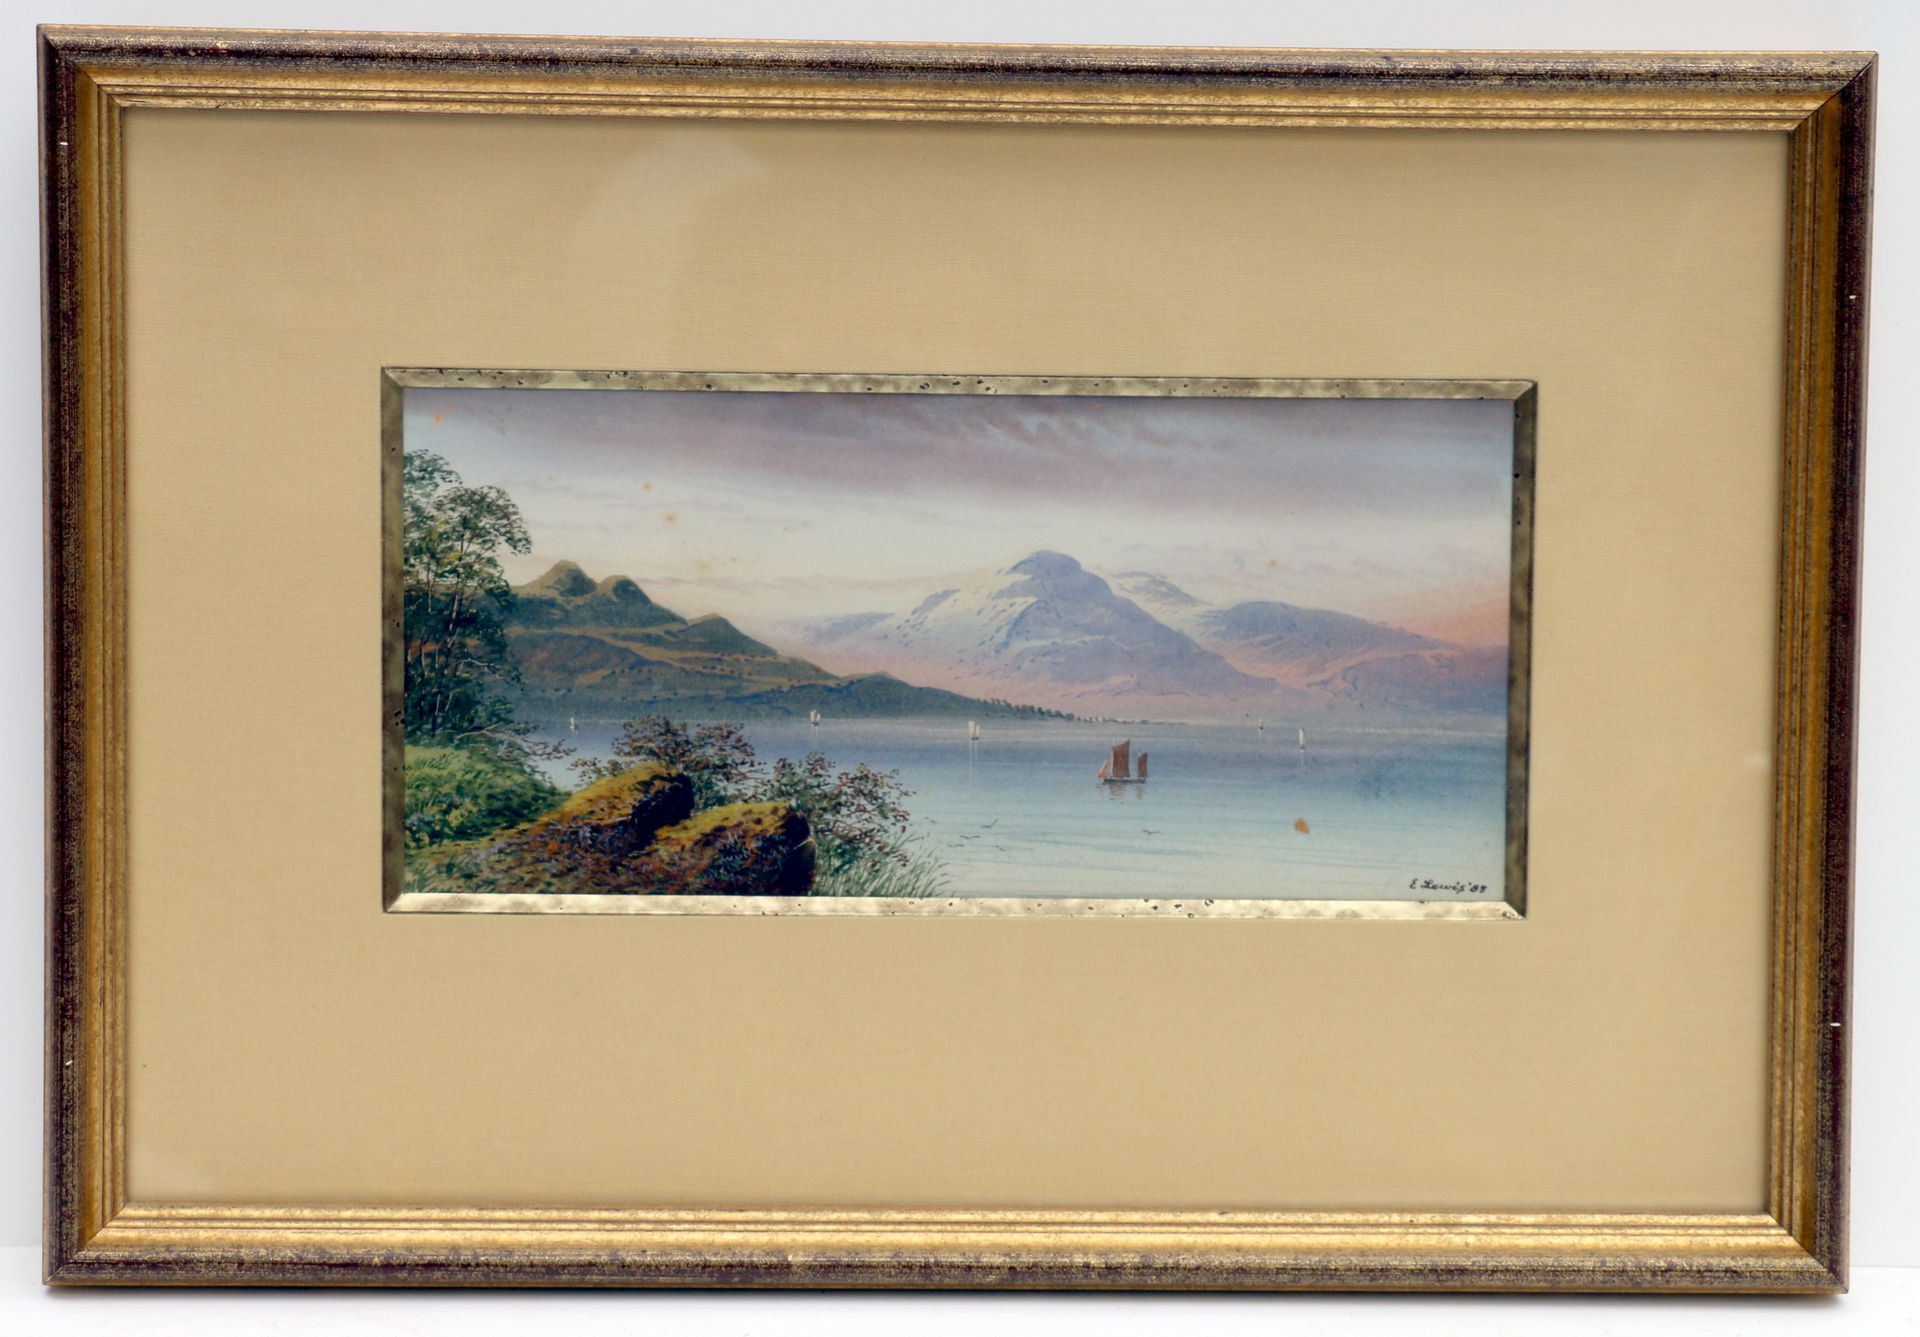 Null Edmund Darch LEWIS (1835-1910) (?) "The Lake" watercolour Sbd, dated 88. H &hellip;